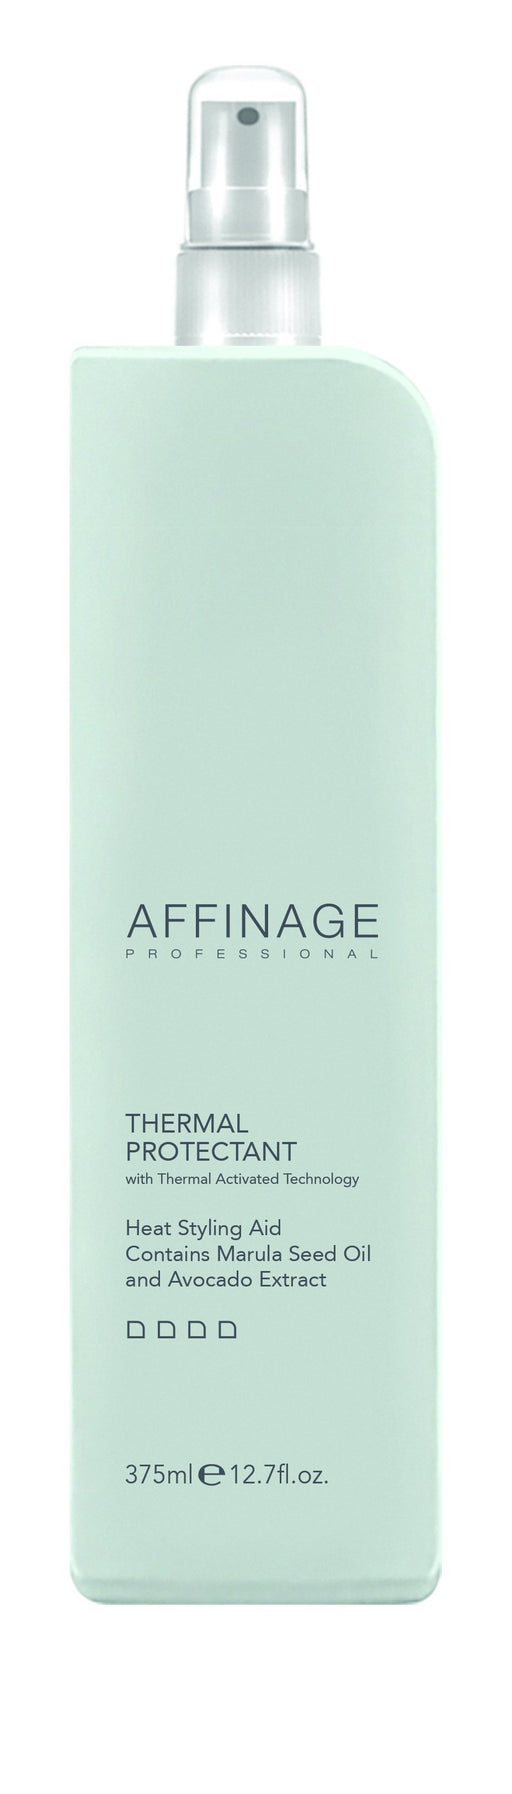 Affinage Thermal Protectant